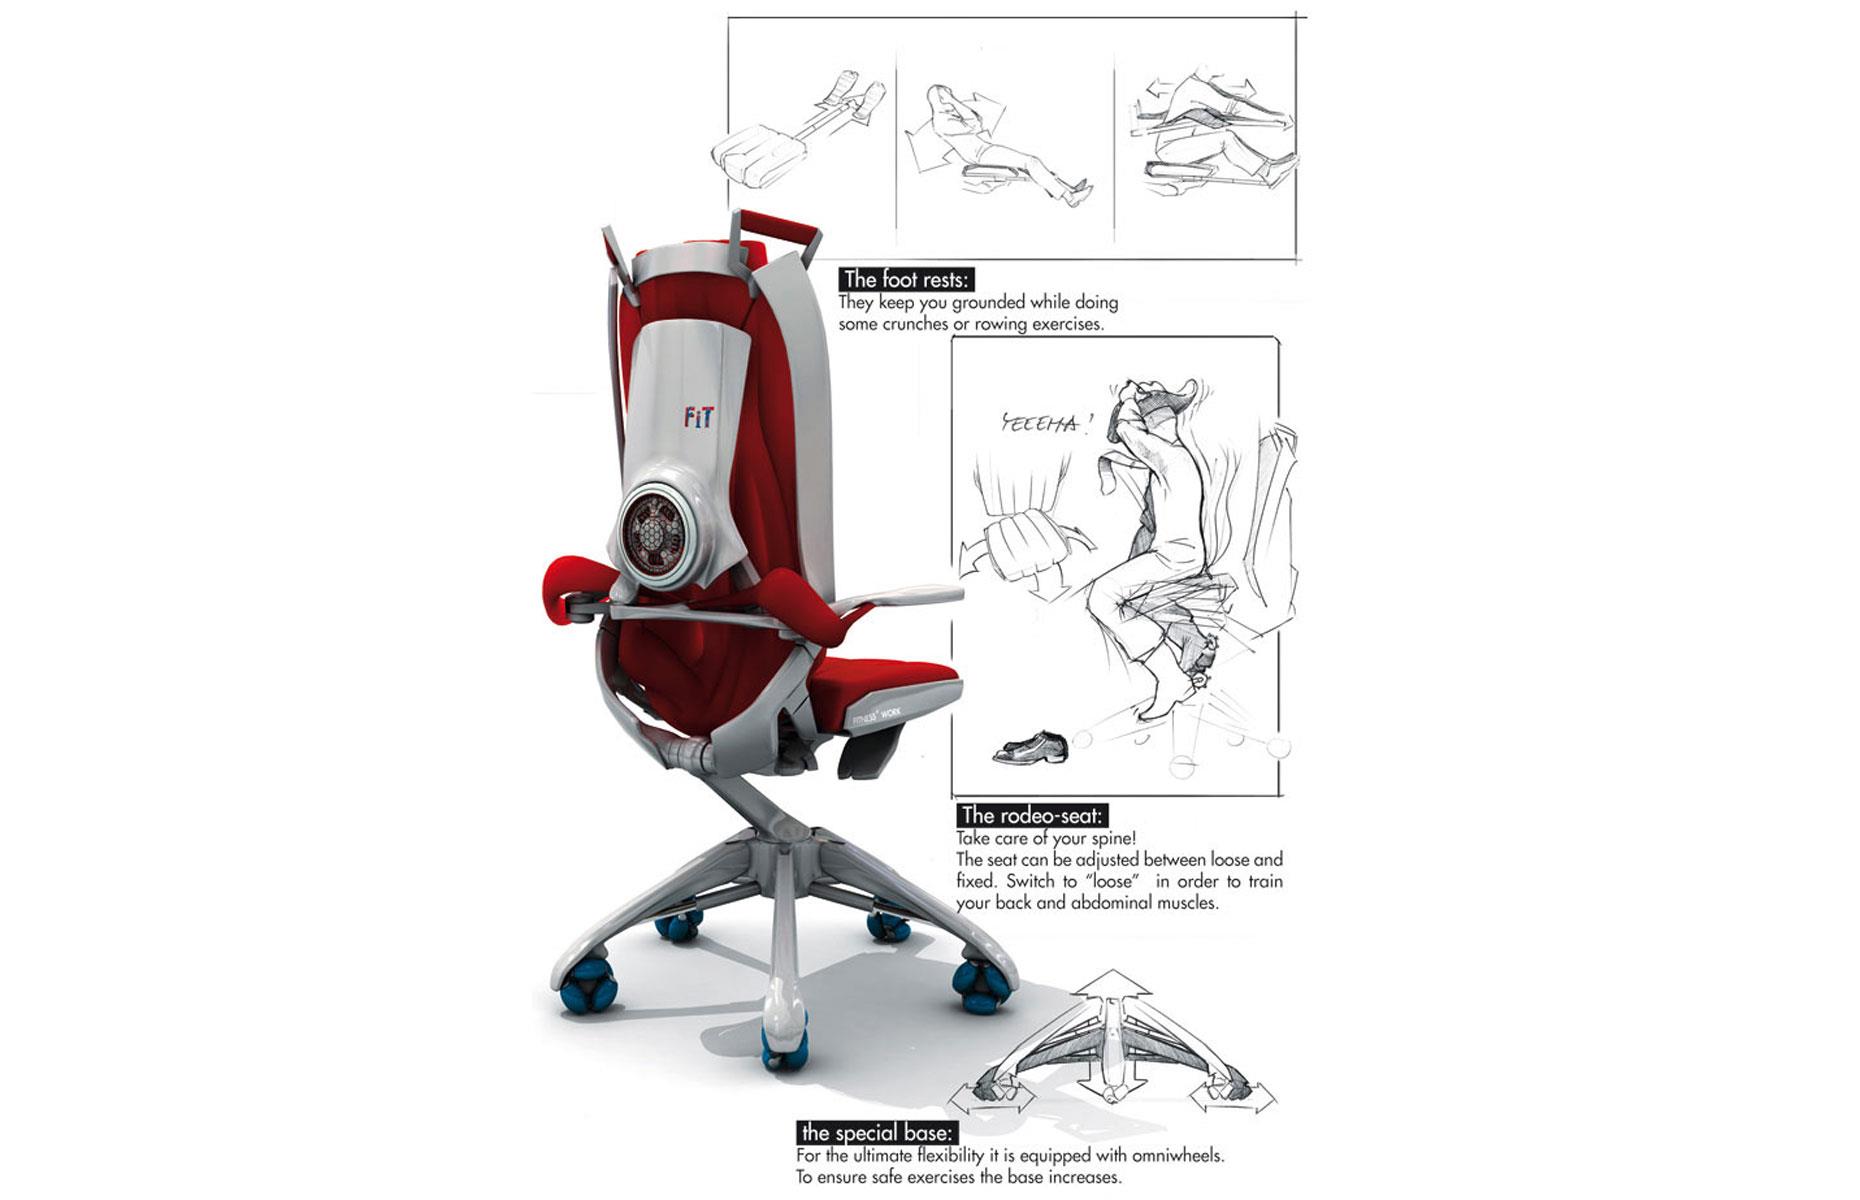 Fitness@Work office chair by Benjamin Cselley 